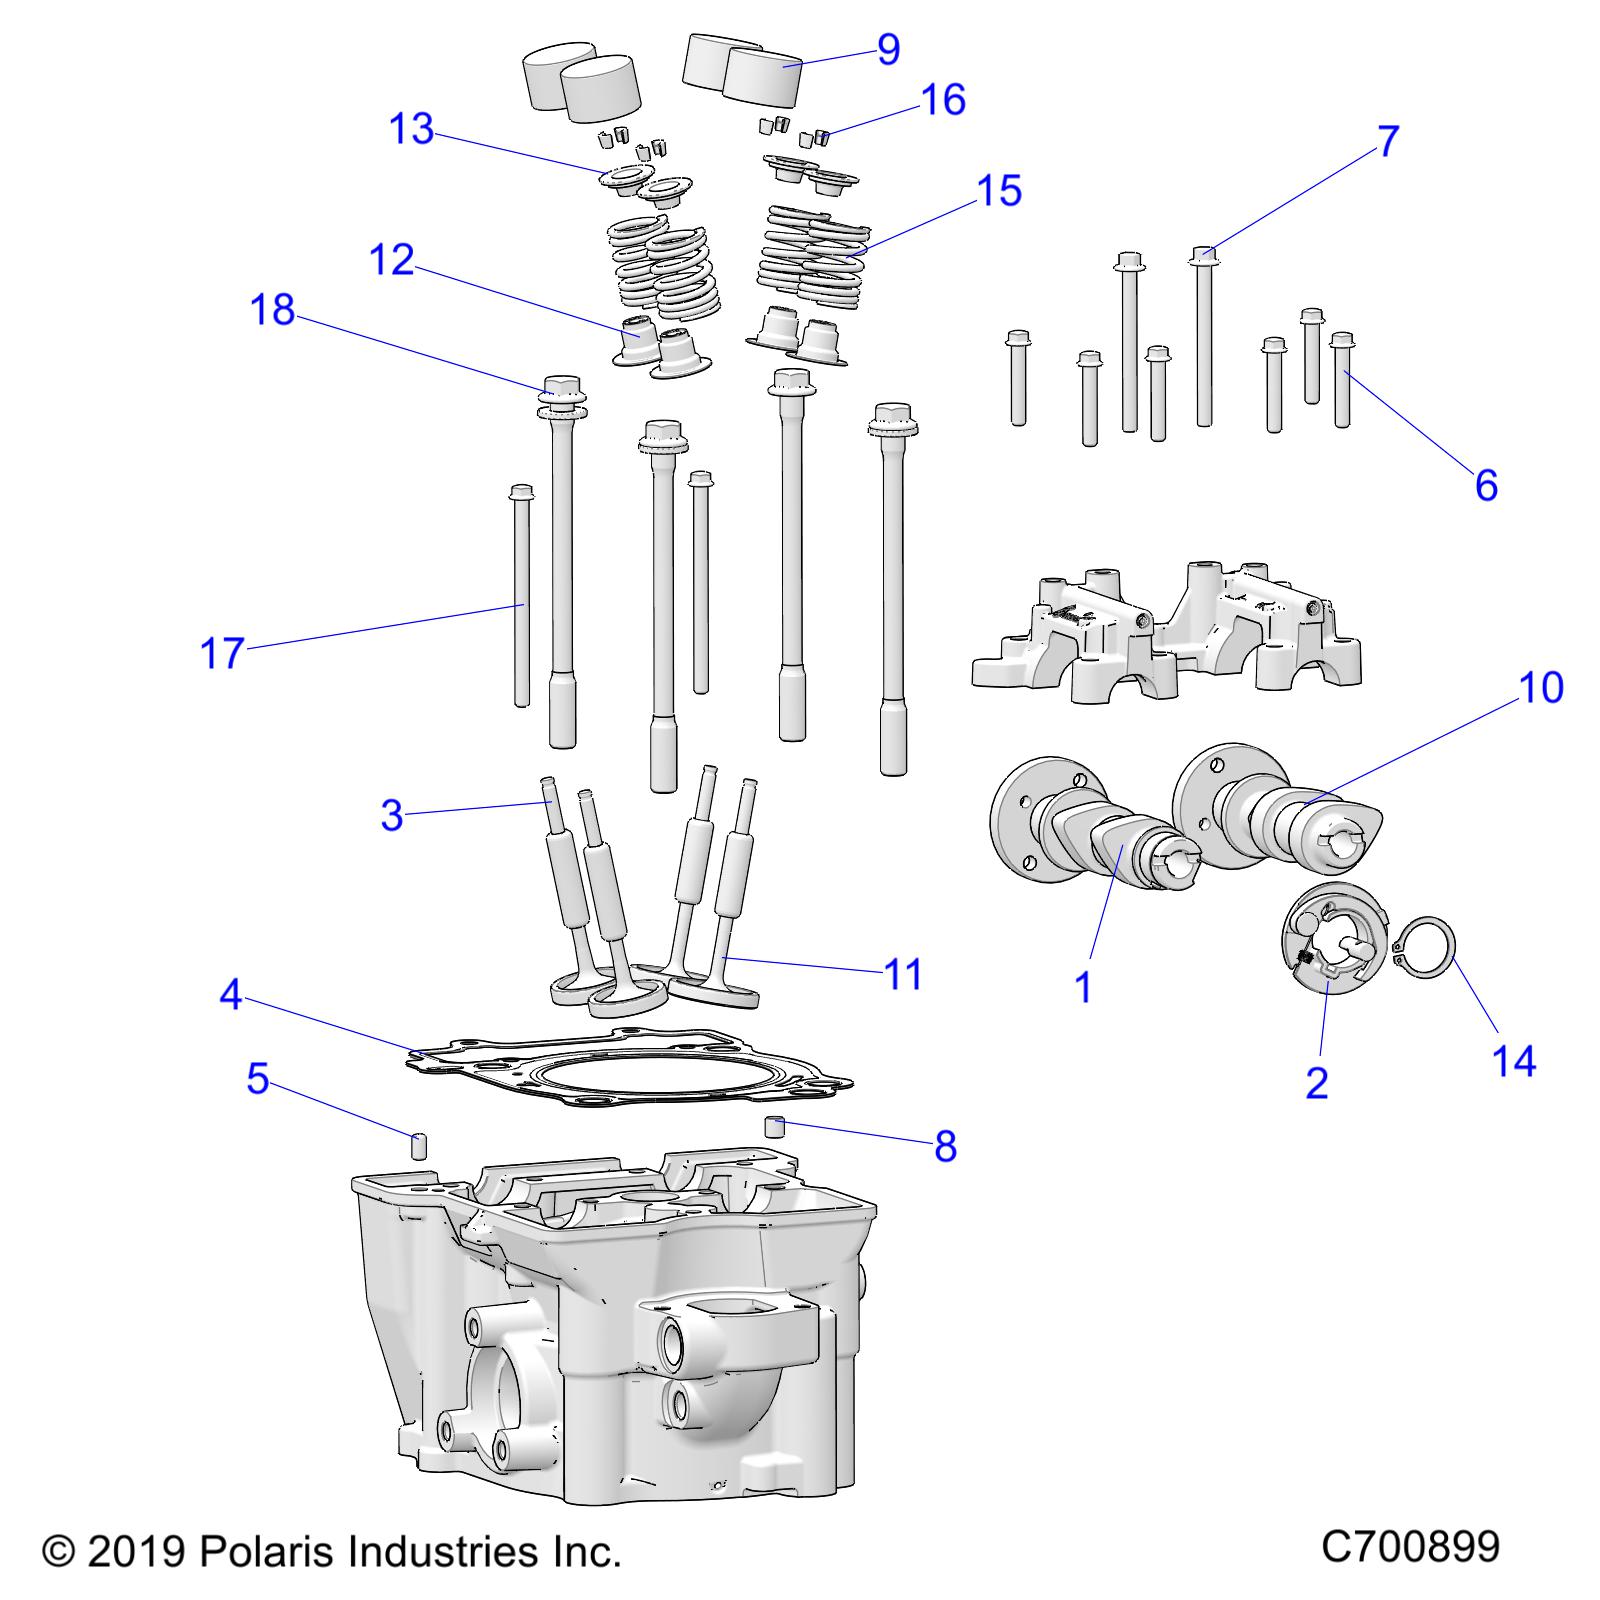 Part Number : 3023632 EXHAUST CAMSHAFT ASSEMBLY